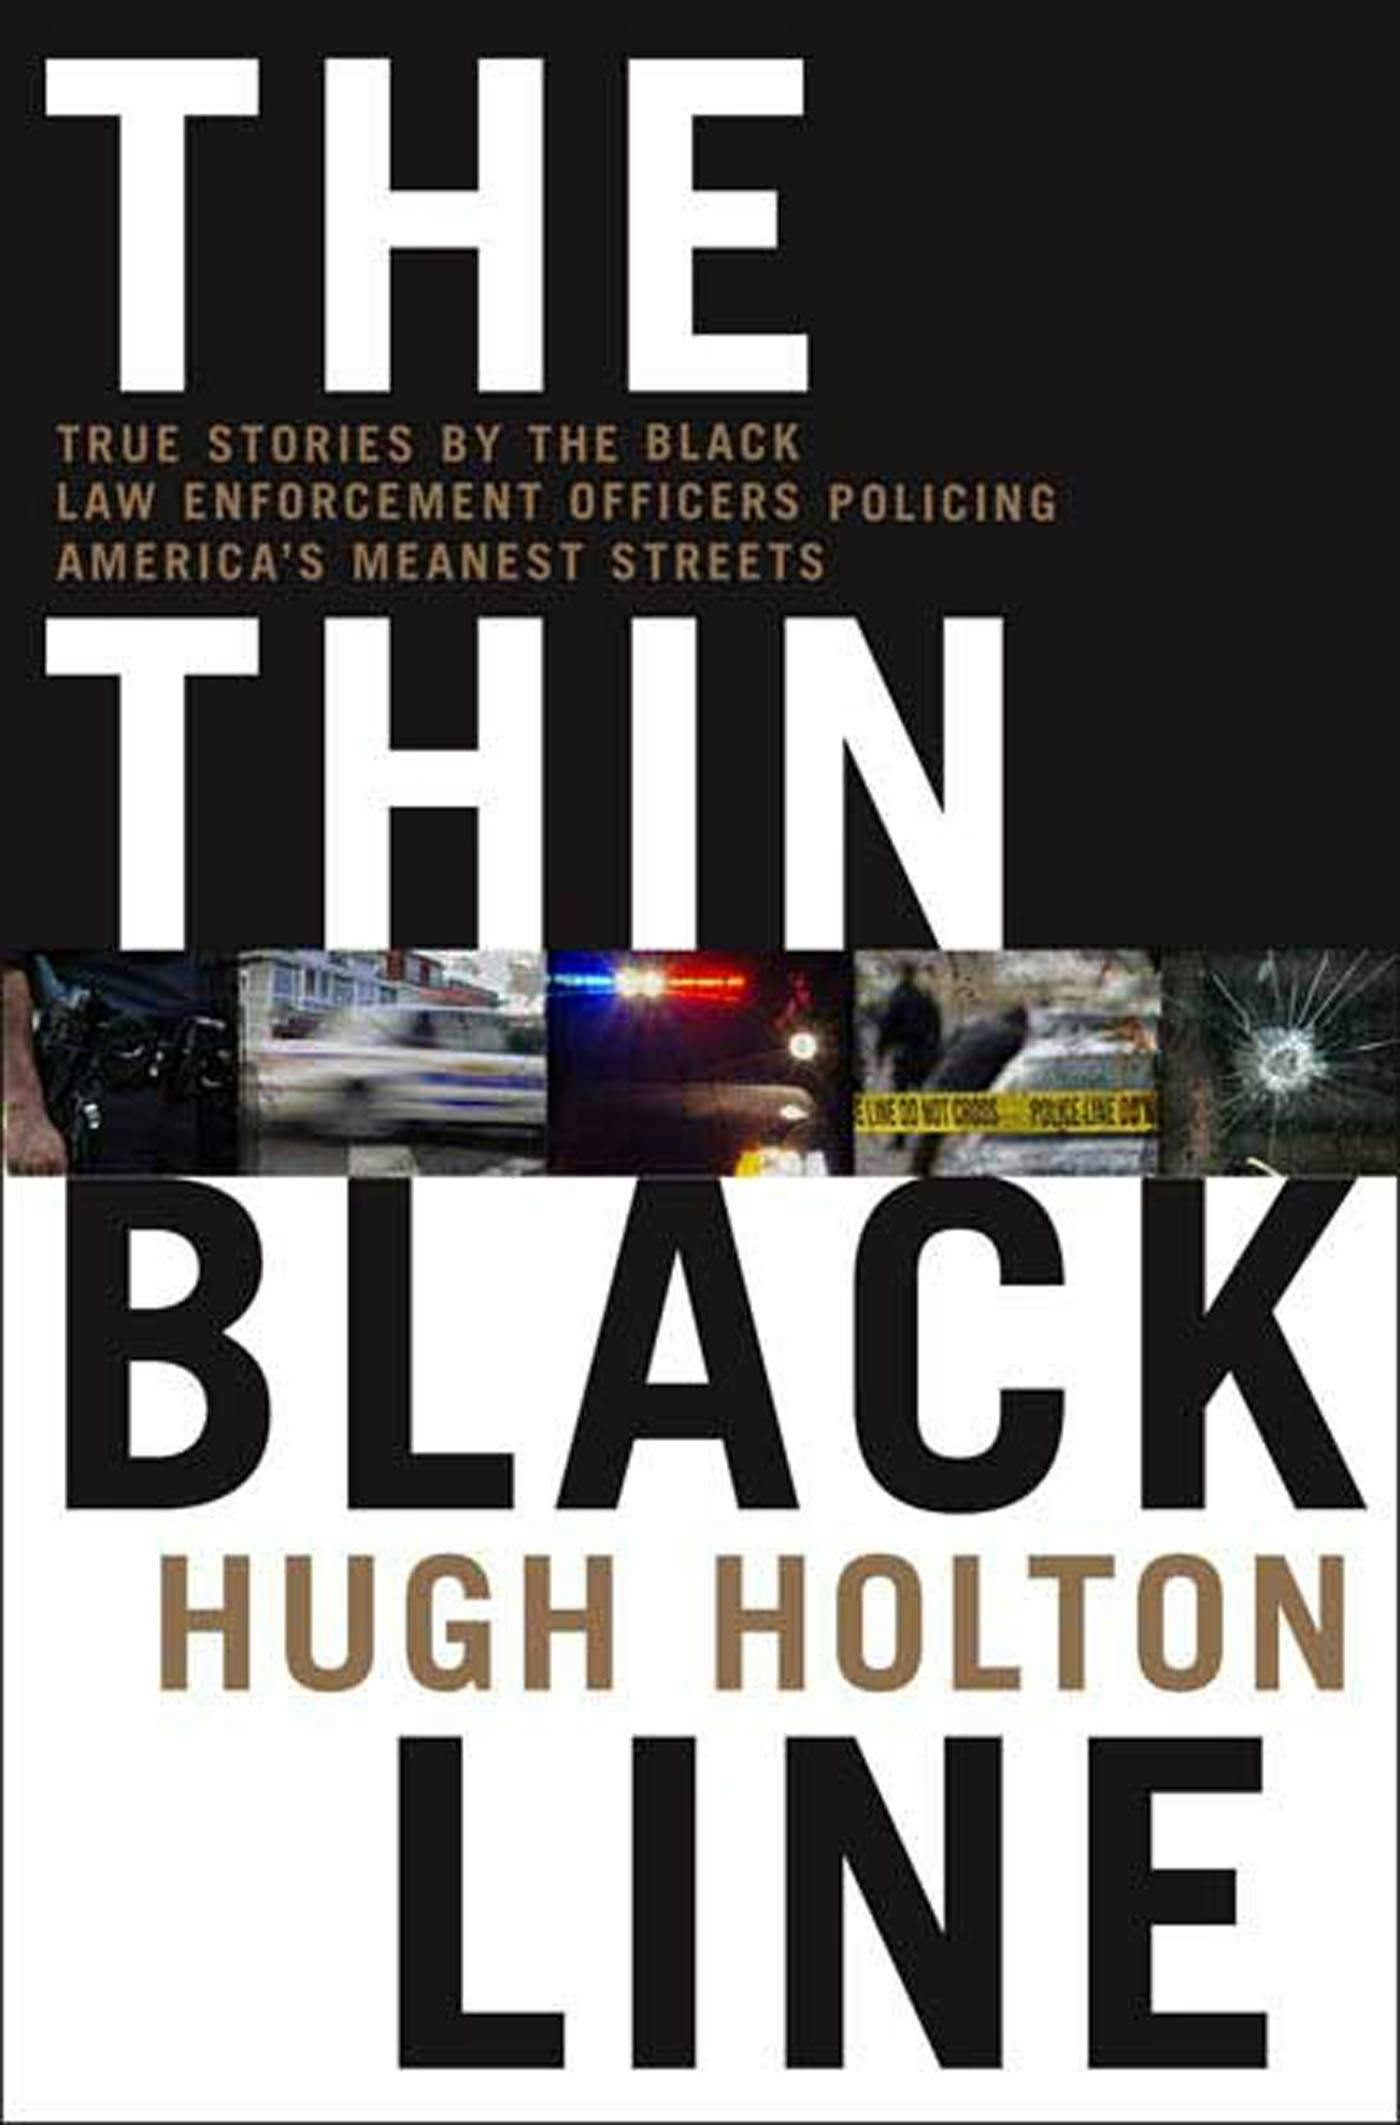 Cover for the book titled as: The Thin Black Line